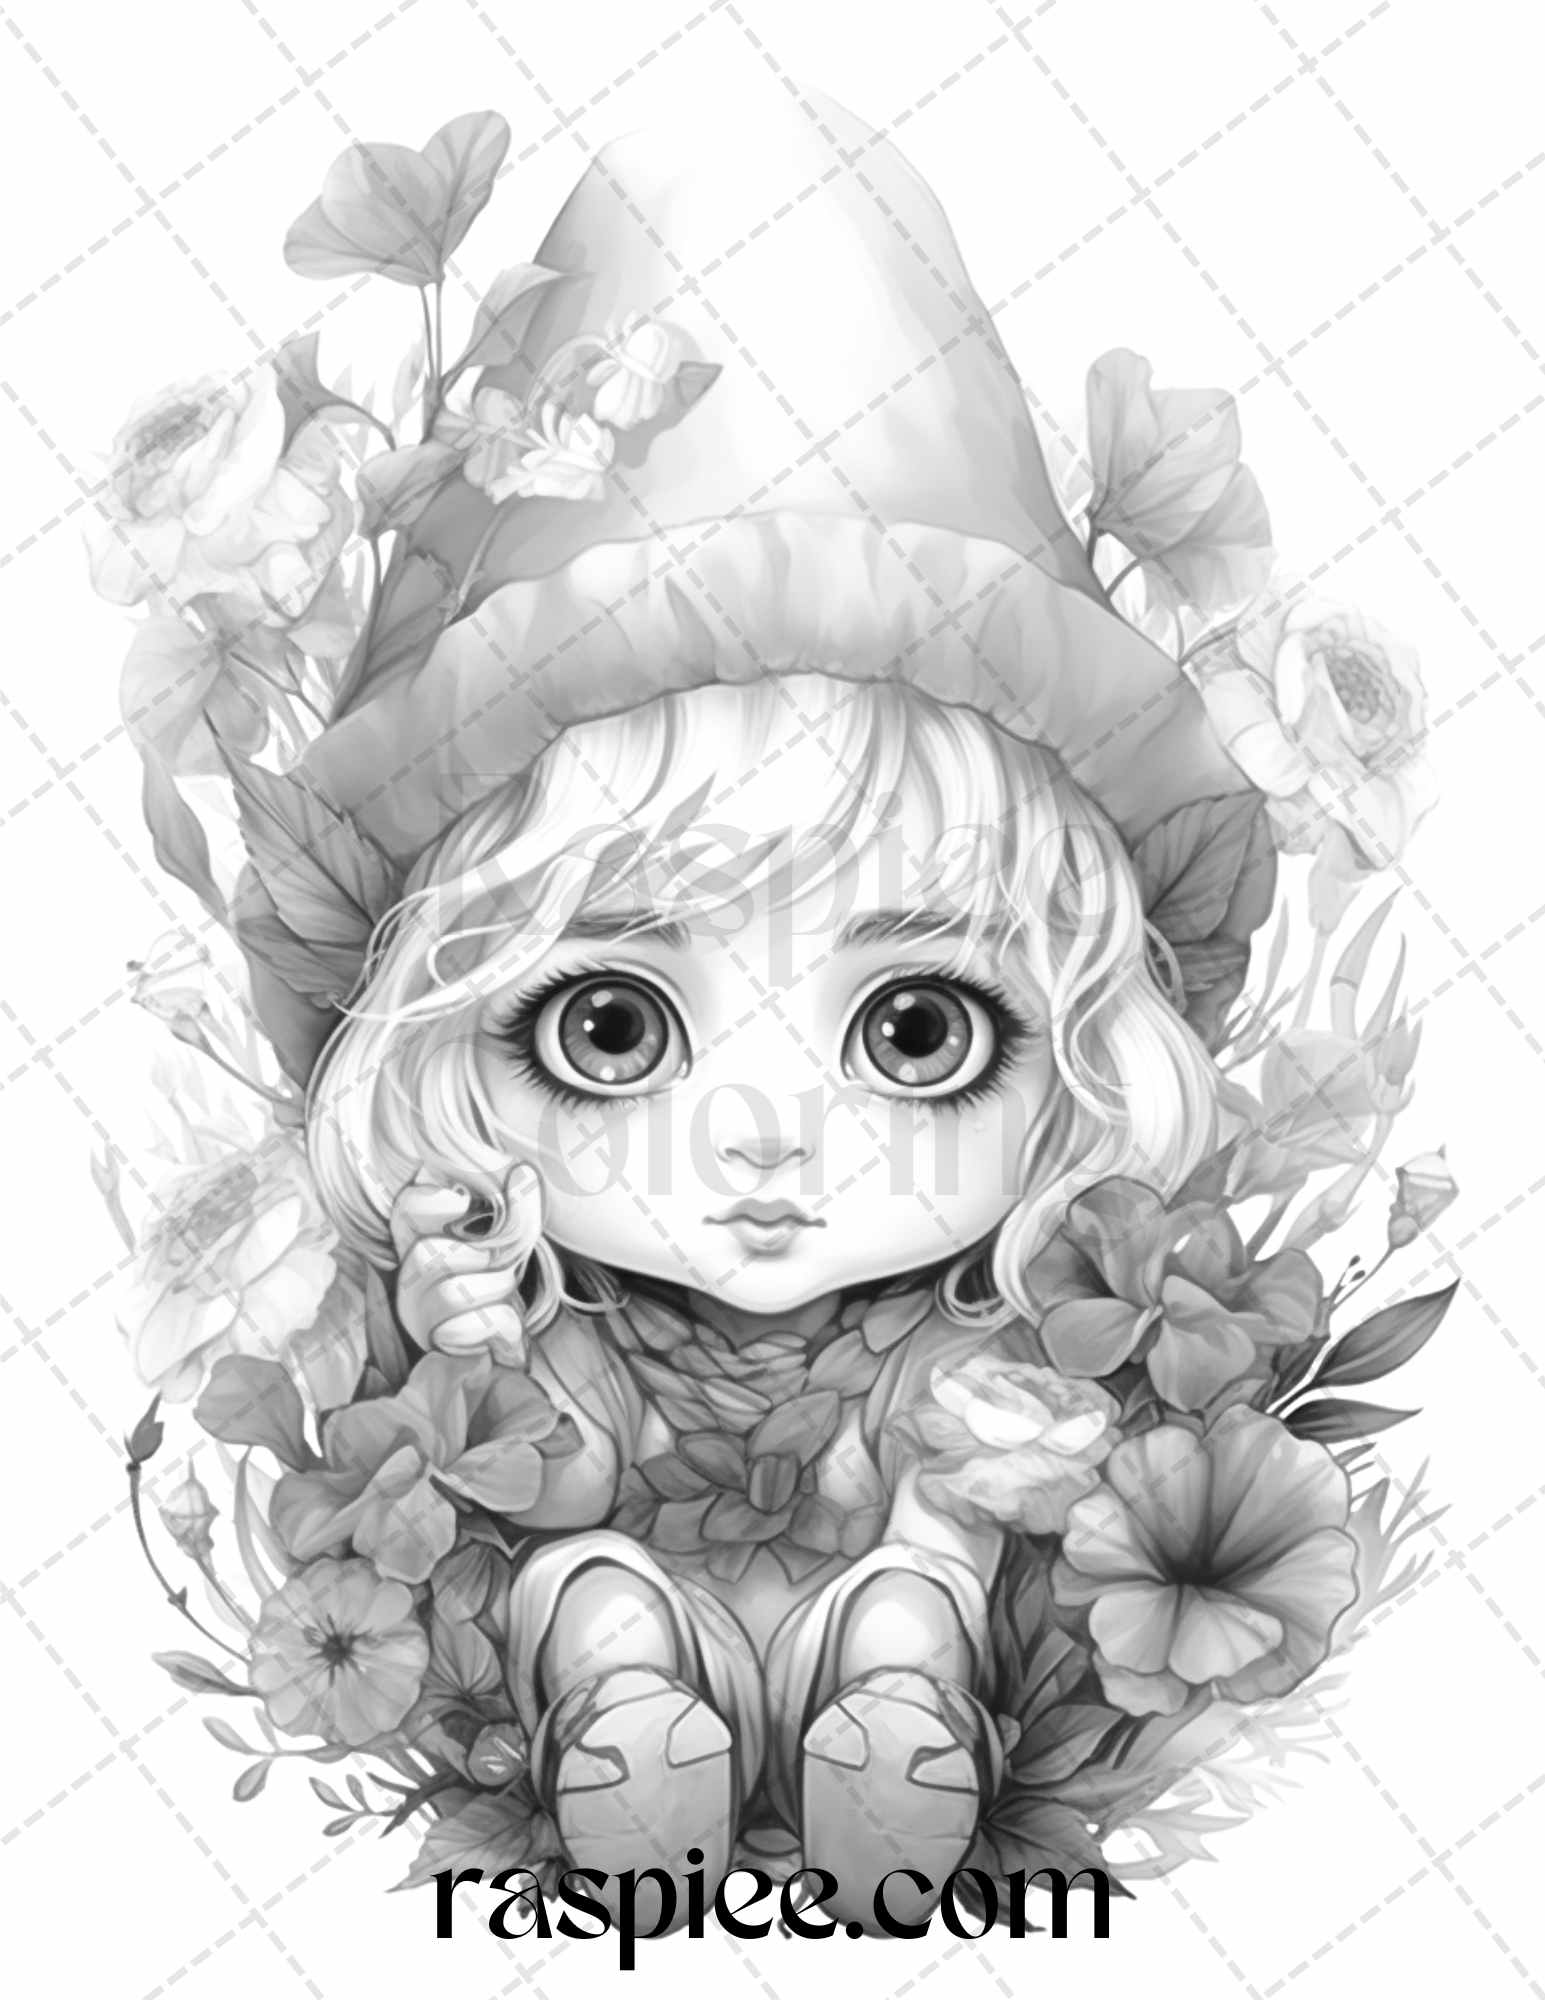 50 Flower Gnomes Grayscale Coloring Pages Printable for Adults Kids, PDF File Instant Download - raspiee